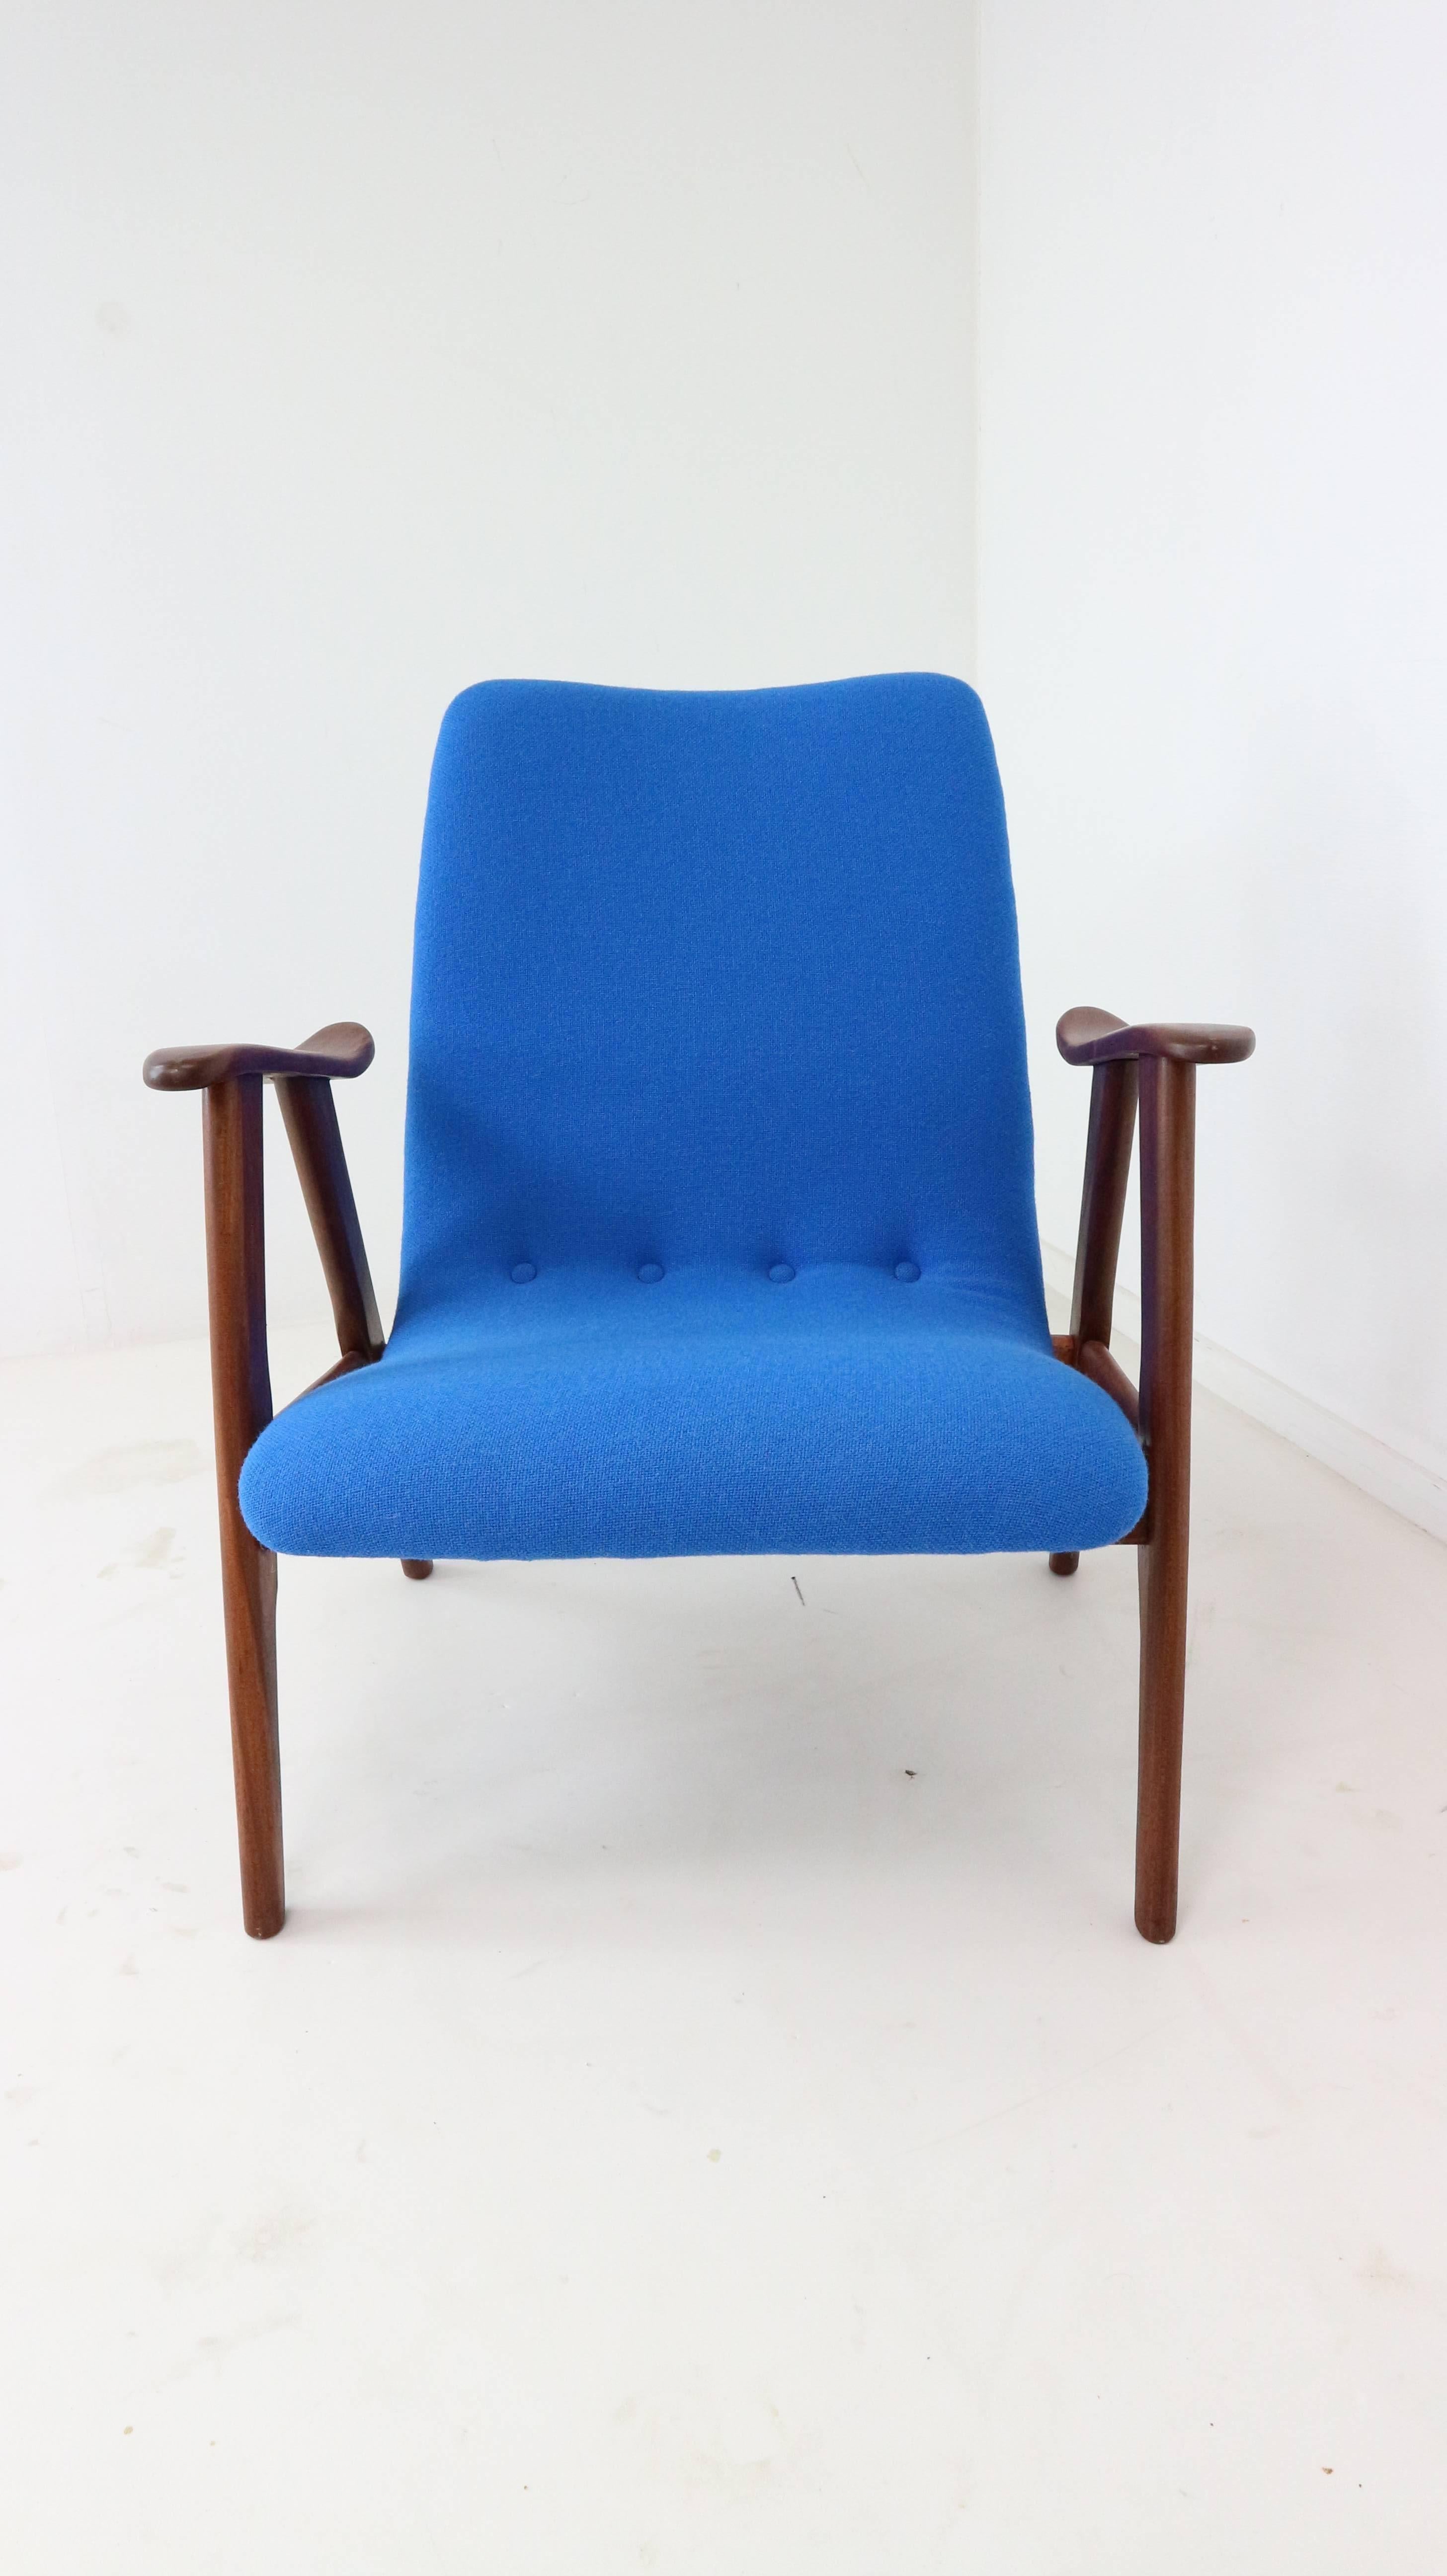 Dutch New Upholstered Lounge Chair by Louis Van Teeffelen for Webe, 1960s